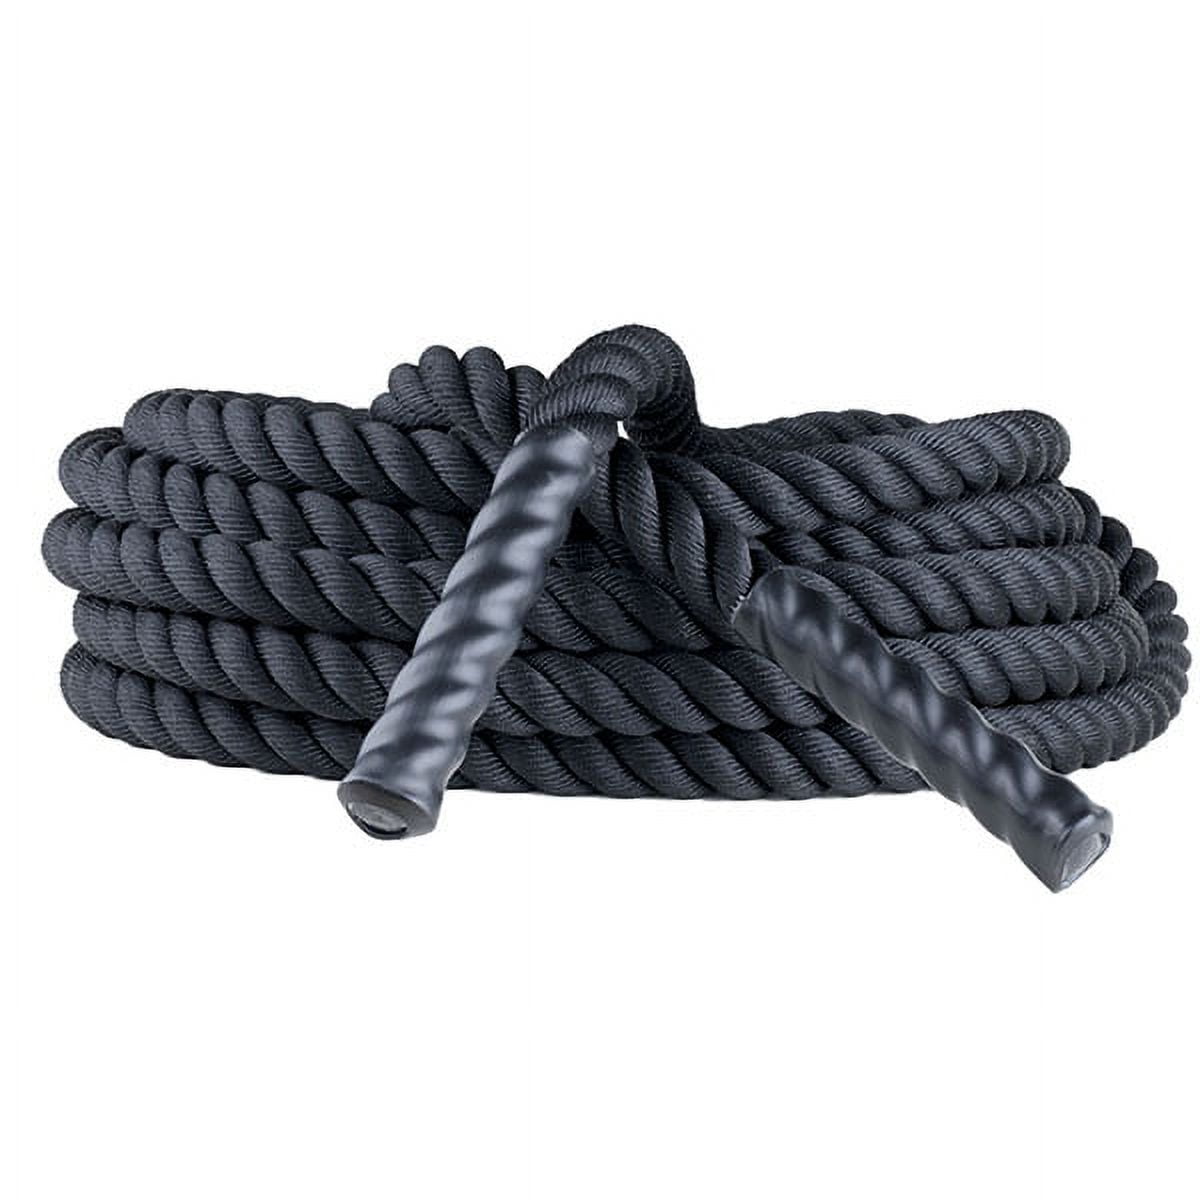 Picture of Champion Sports RPT1530 1.5 in. x 30 ft. Rhino Poly Training Rope, Black